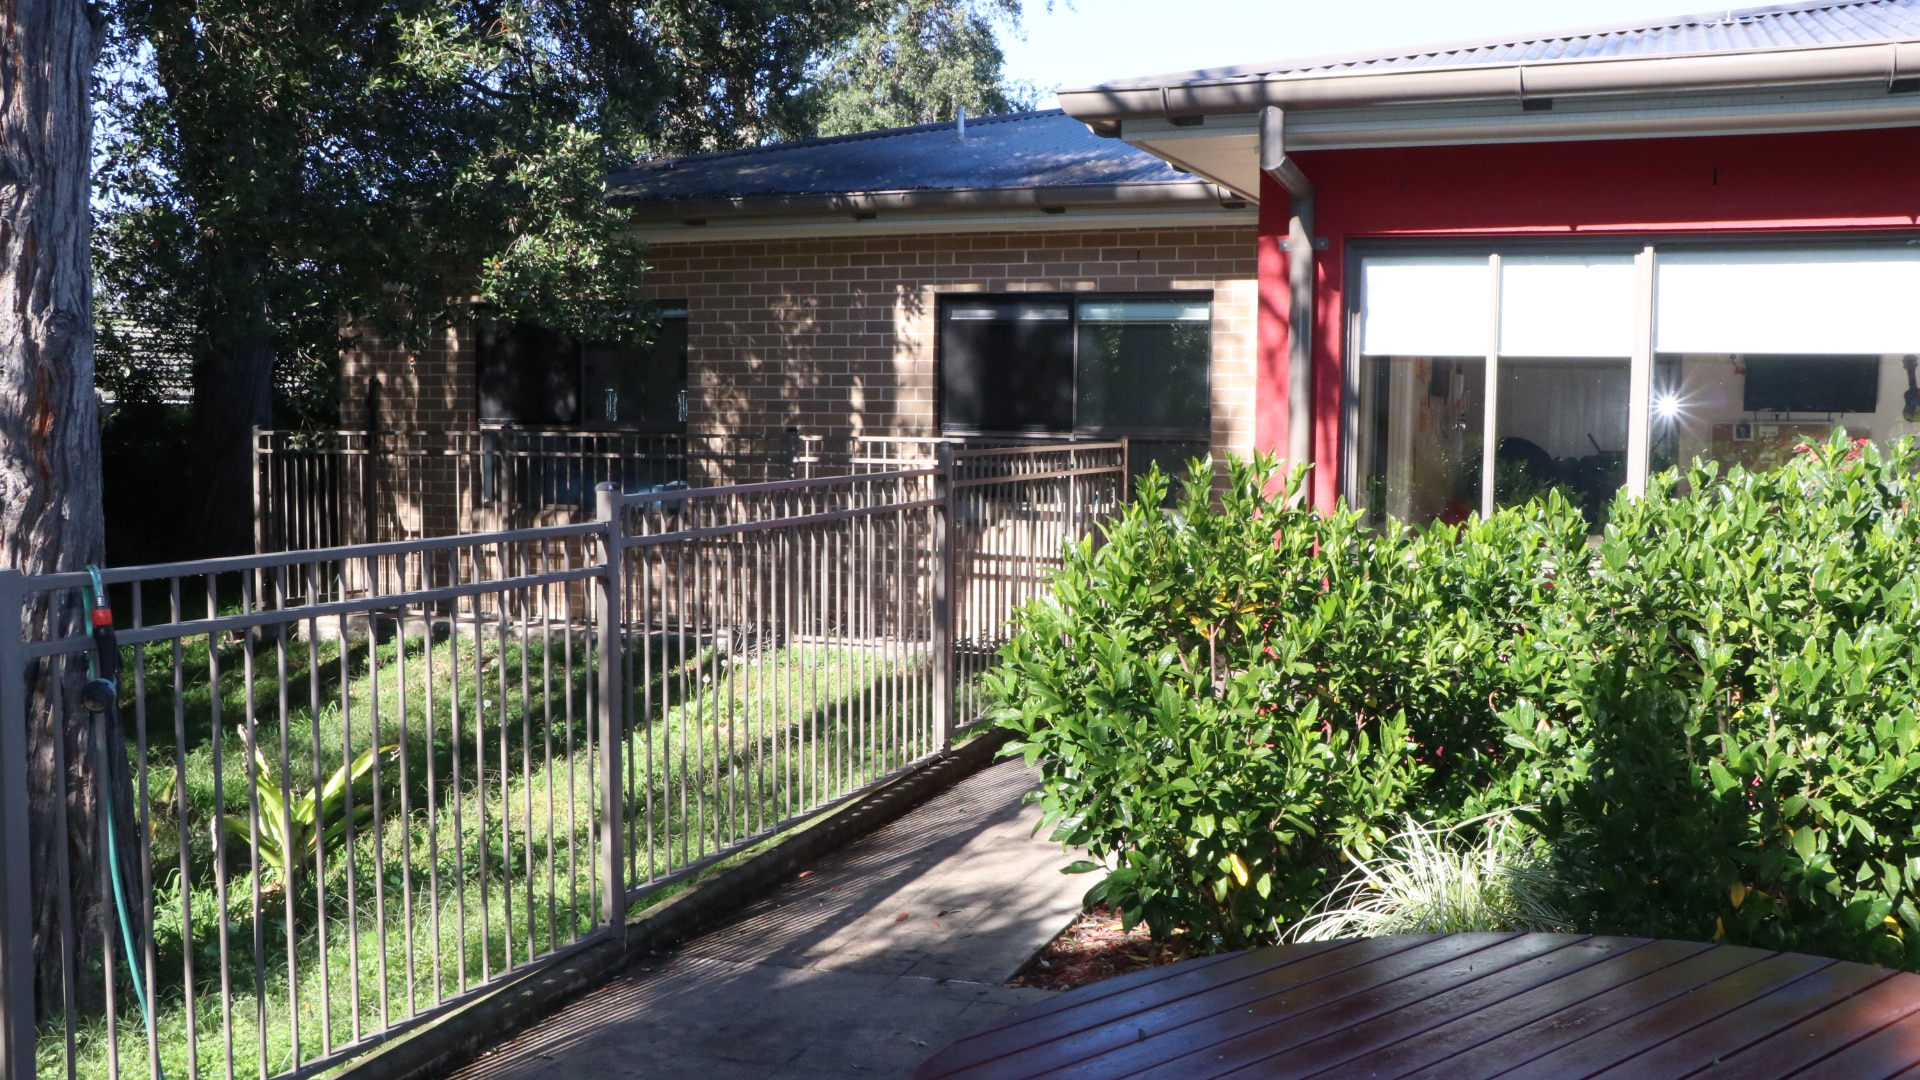 Outdoor fenced grass area and garden outside the Asquith property